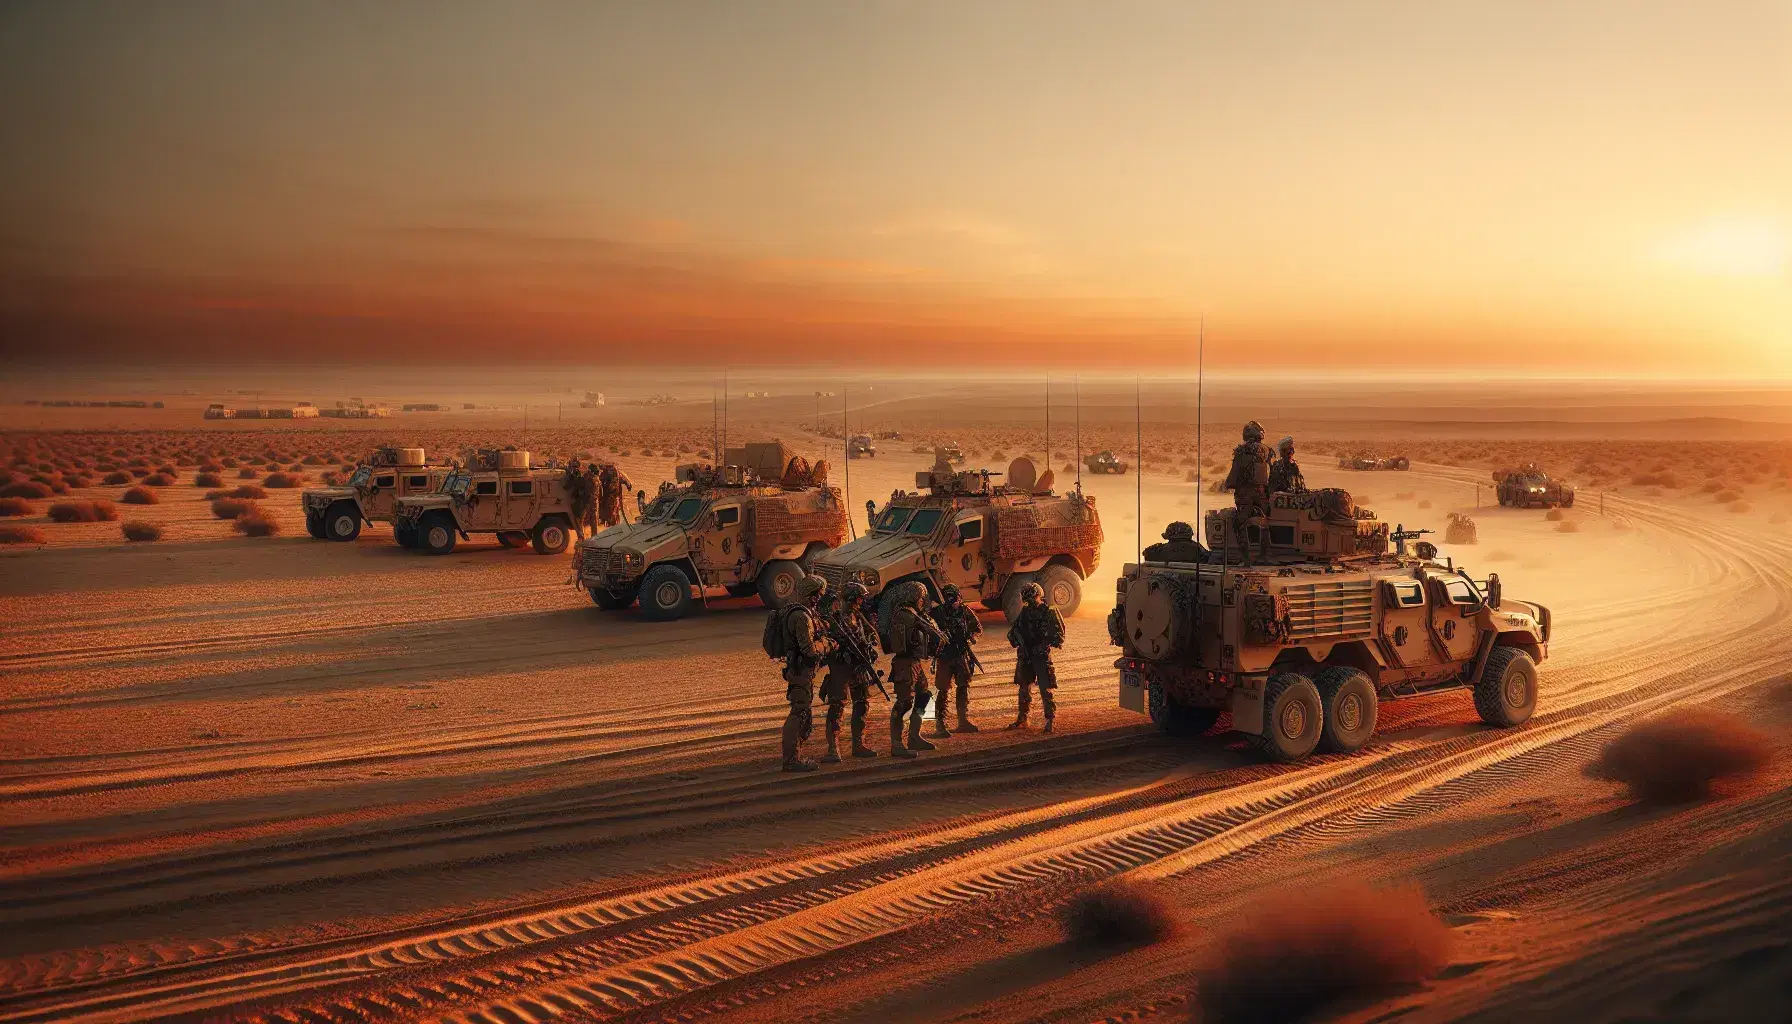 Military convoy with armored vehicles and soldiers in a desert at dusk, under a gradient sky transitioning from blue to orange.